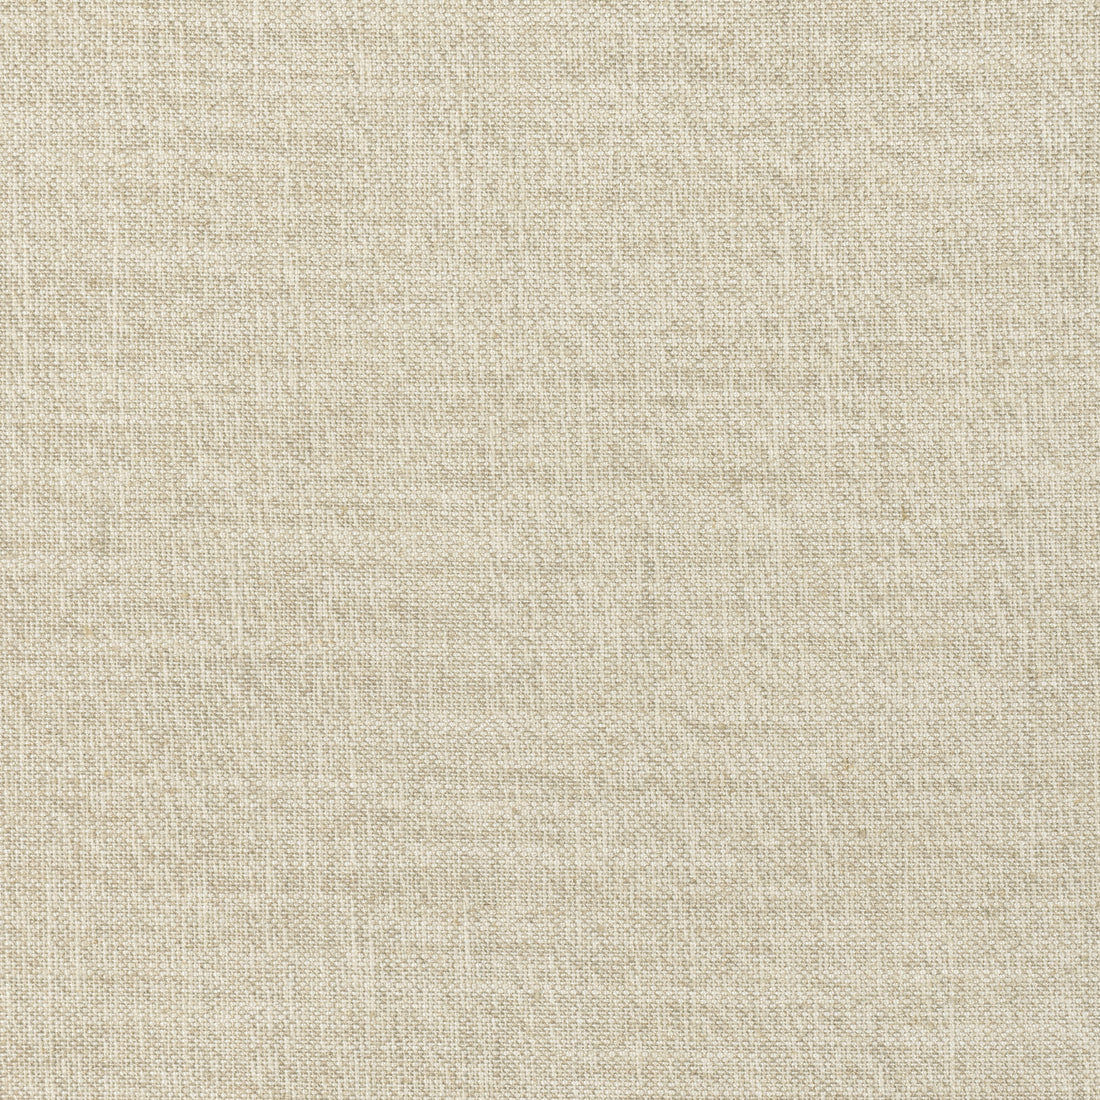 Terra Linen fabric in birch color - pattern number FWW7681 - by Thibaut in the Palisades collection